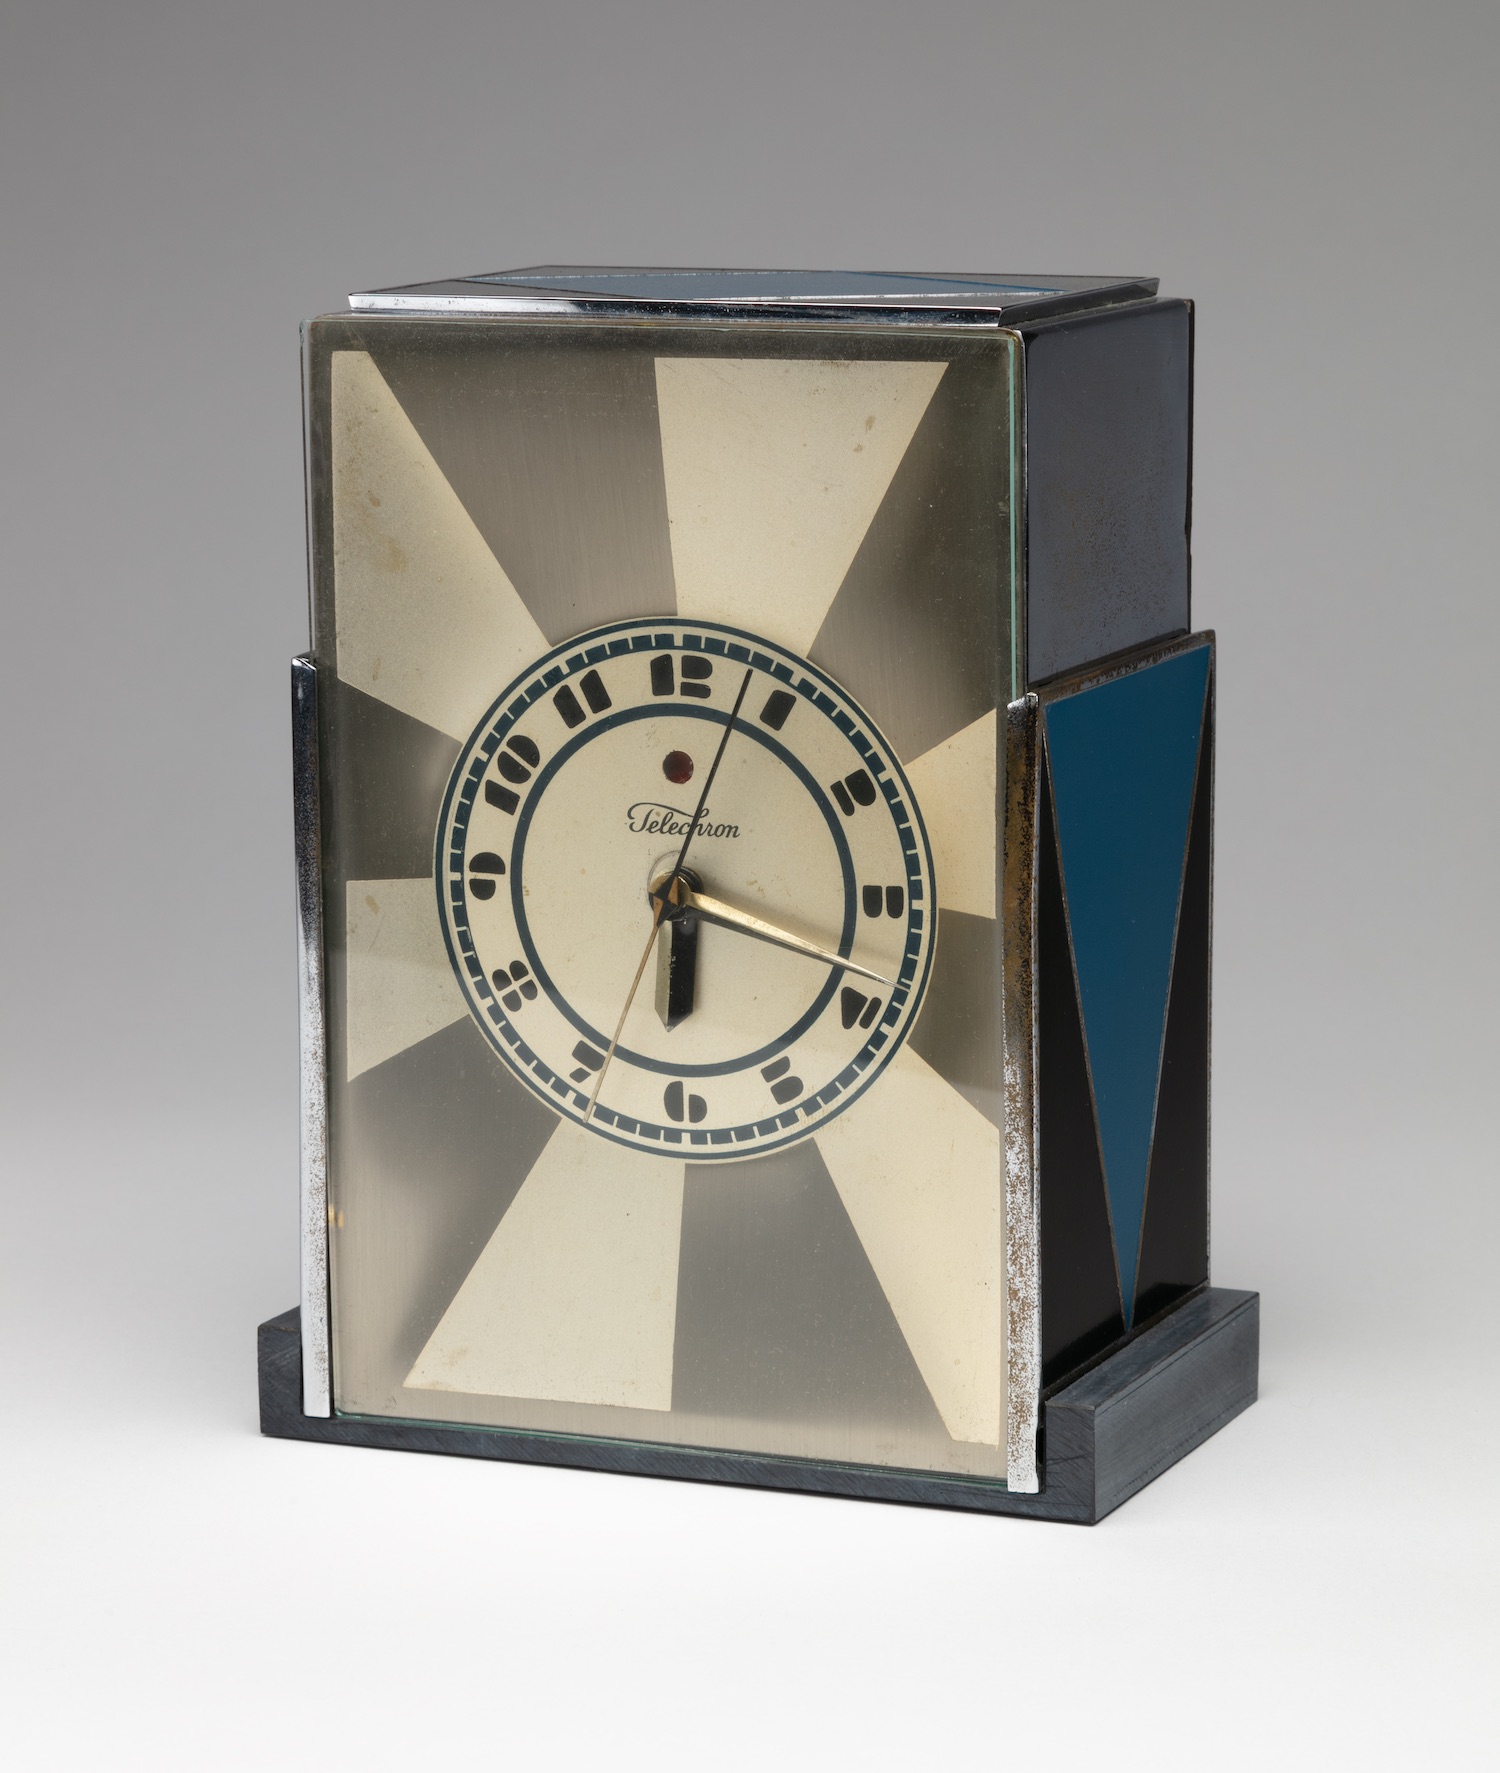 Rectangular clock with fat black and cream-colored rays radiating from the clock face with black numbers. Blue triangles adorn the top and sides.